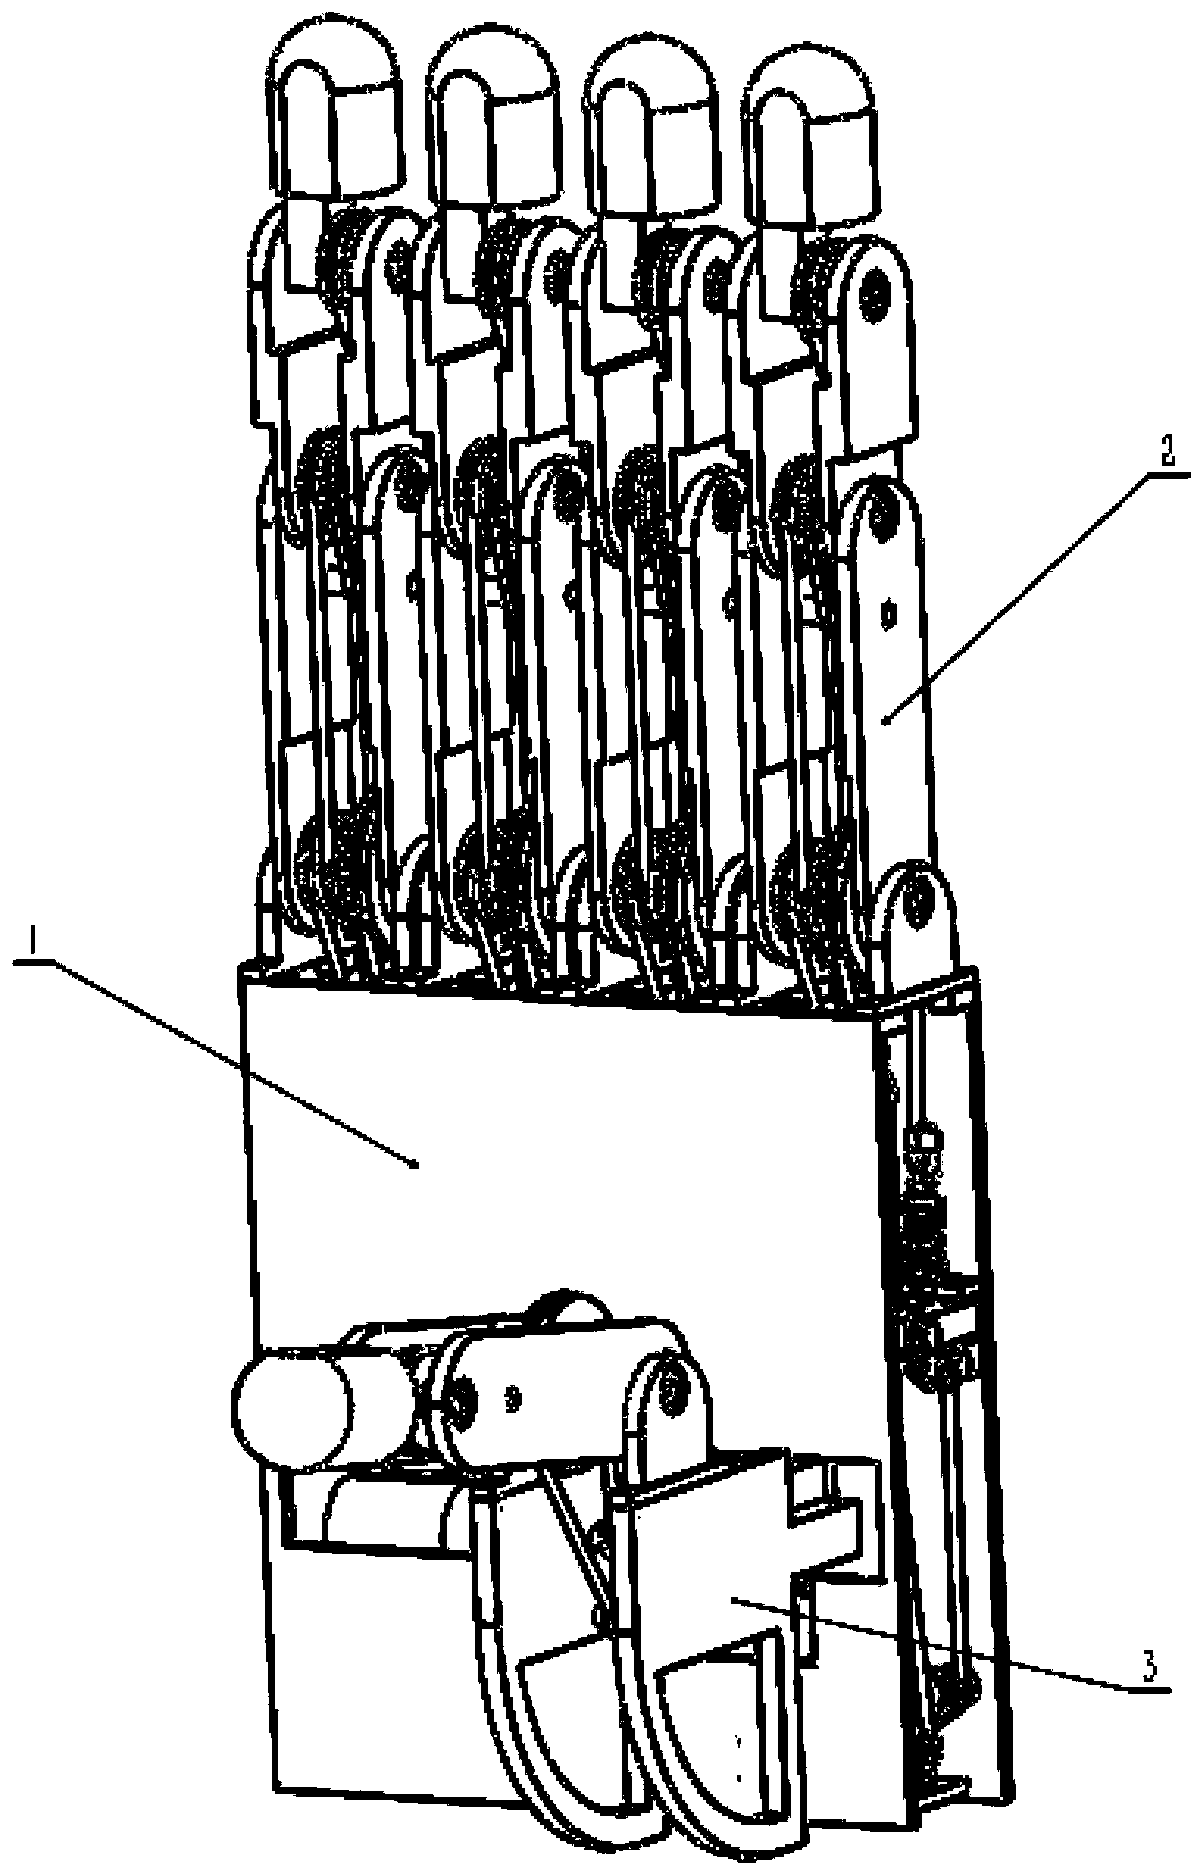 Rope-driven under-actuated five-finger manipulator